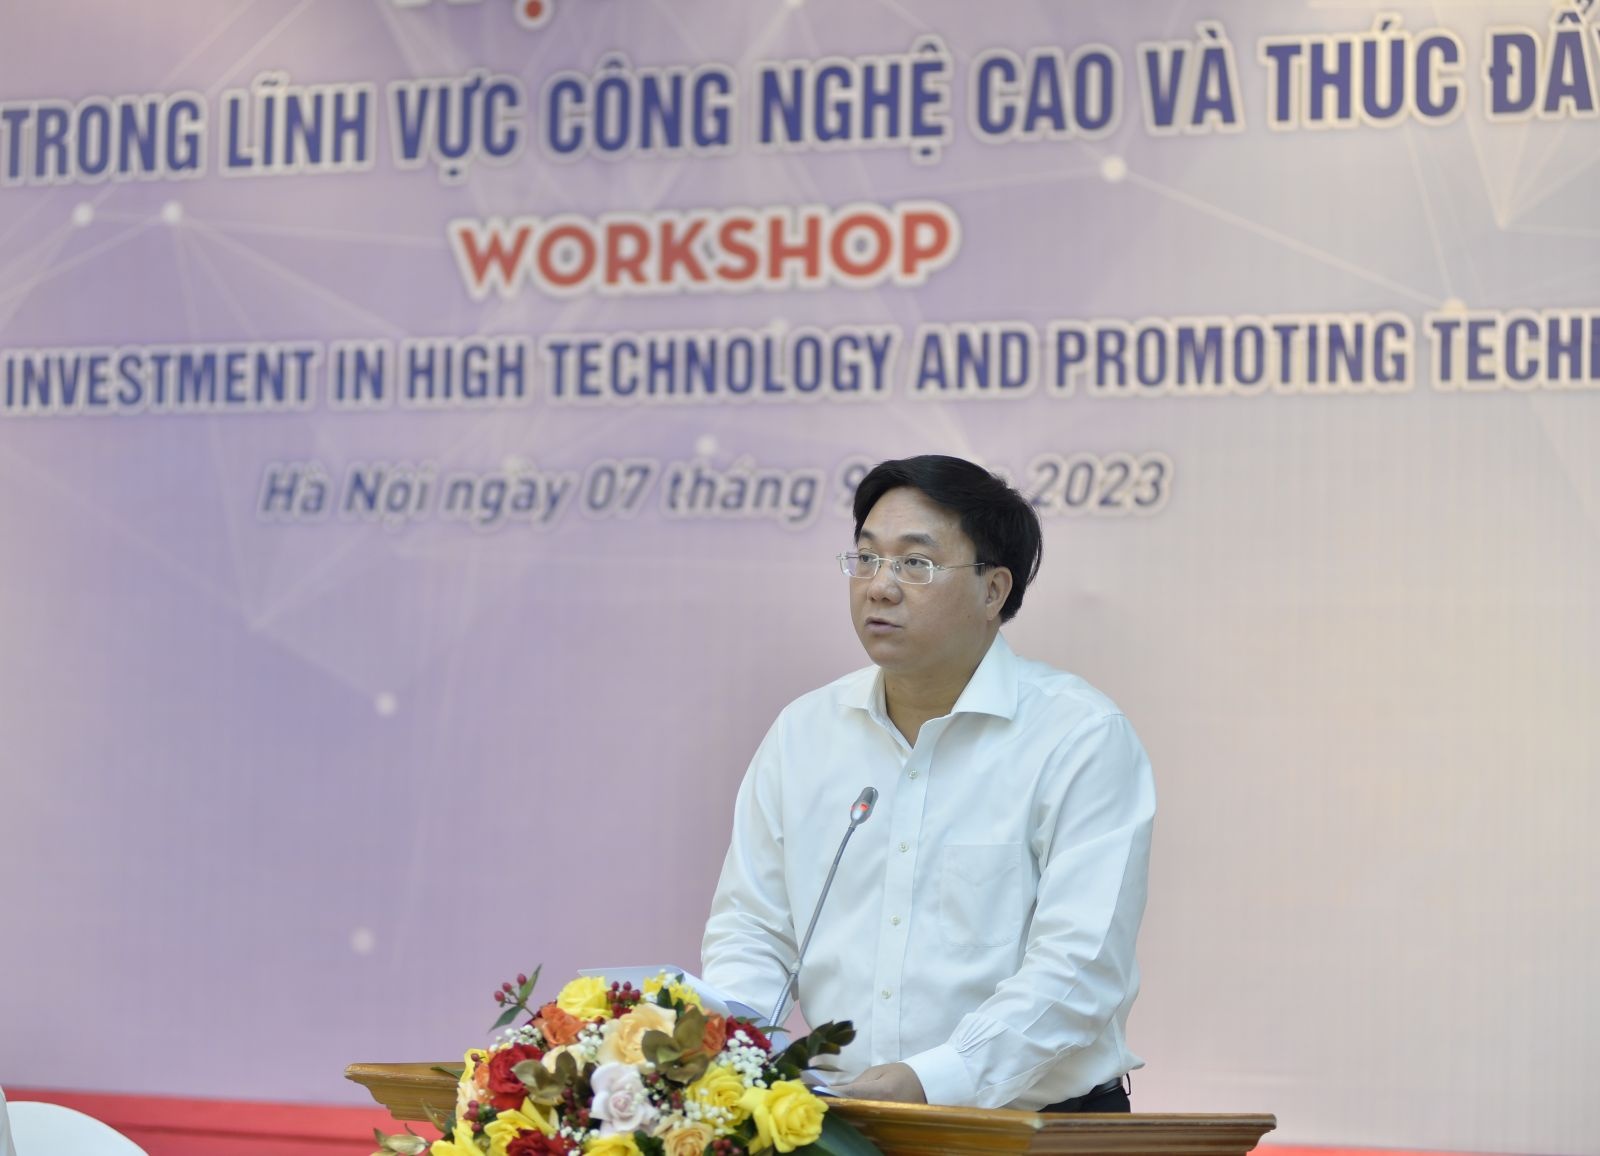 Vietnam sees a low rate of technology transfer from FIEs